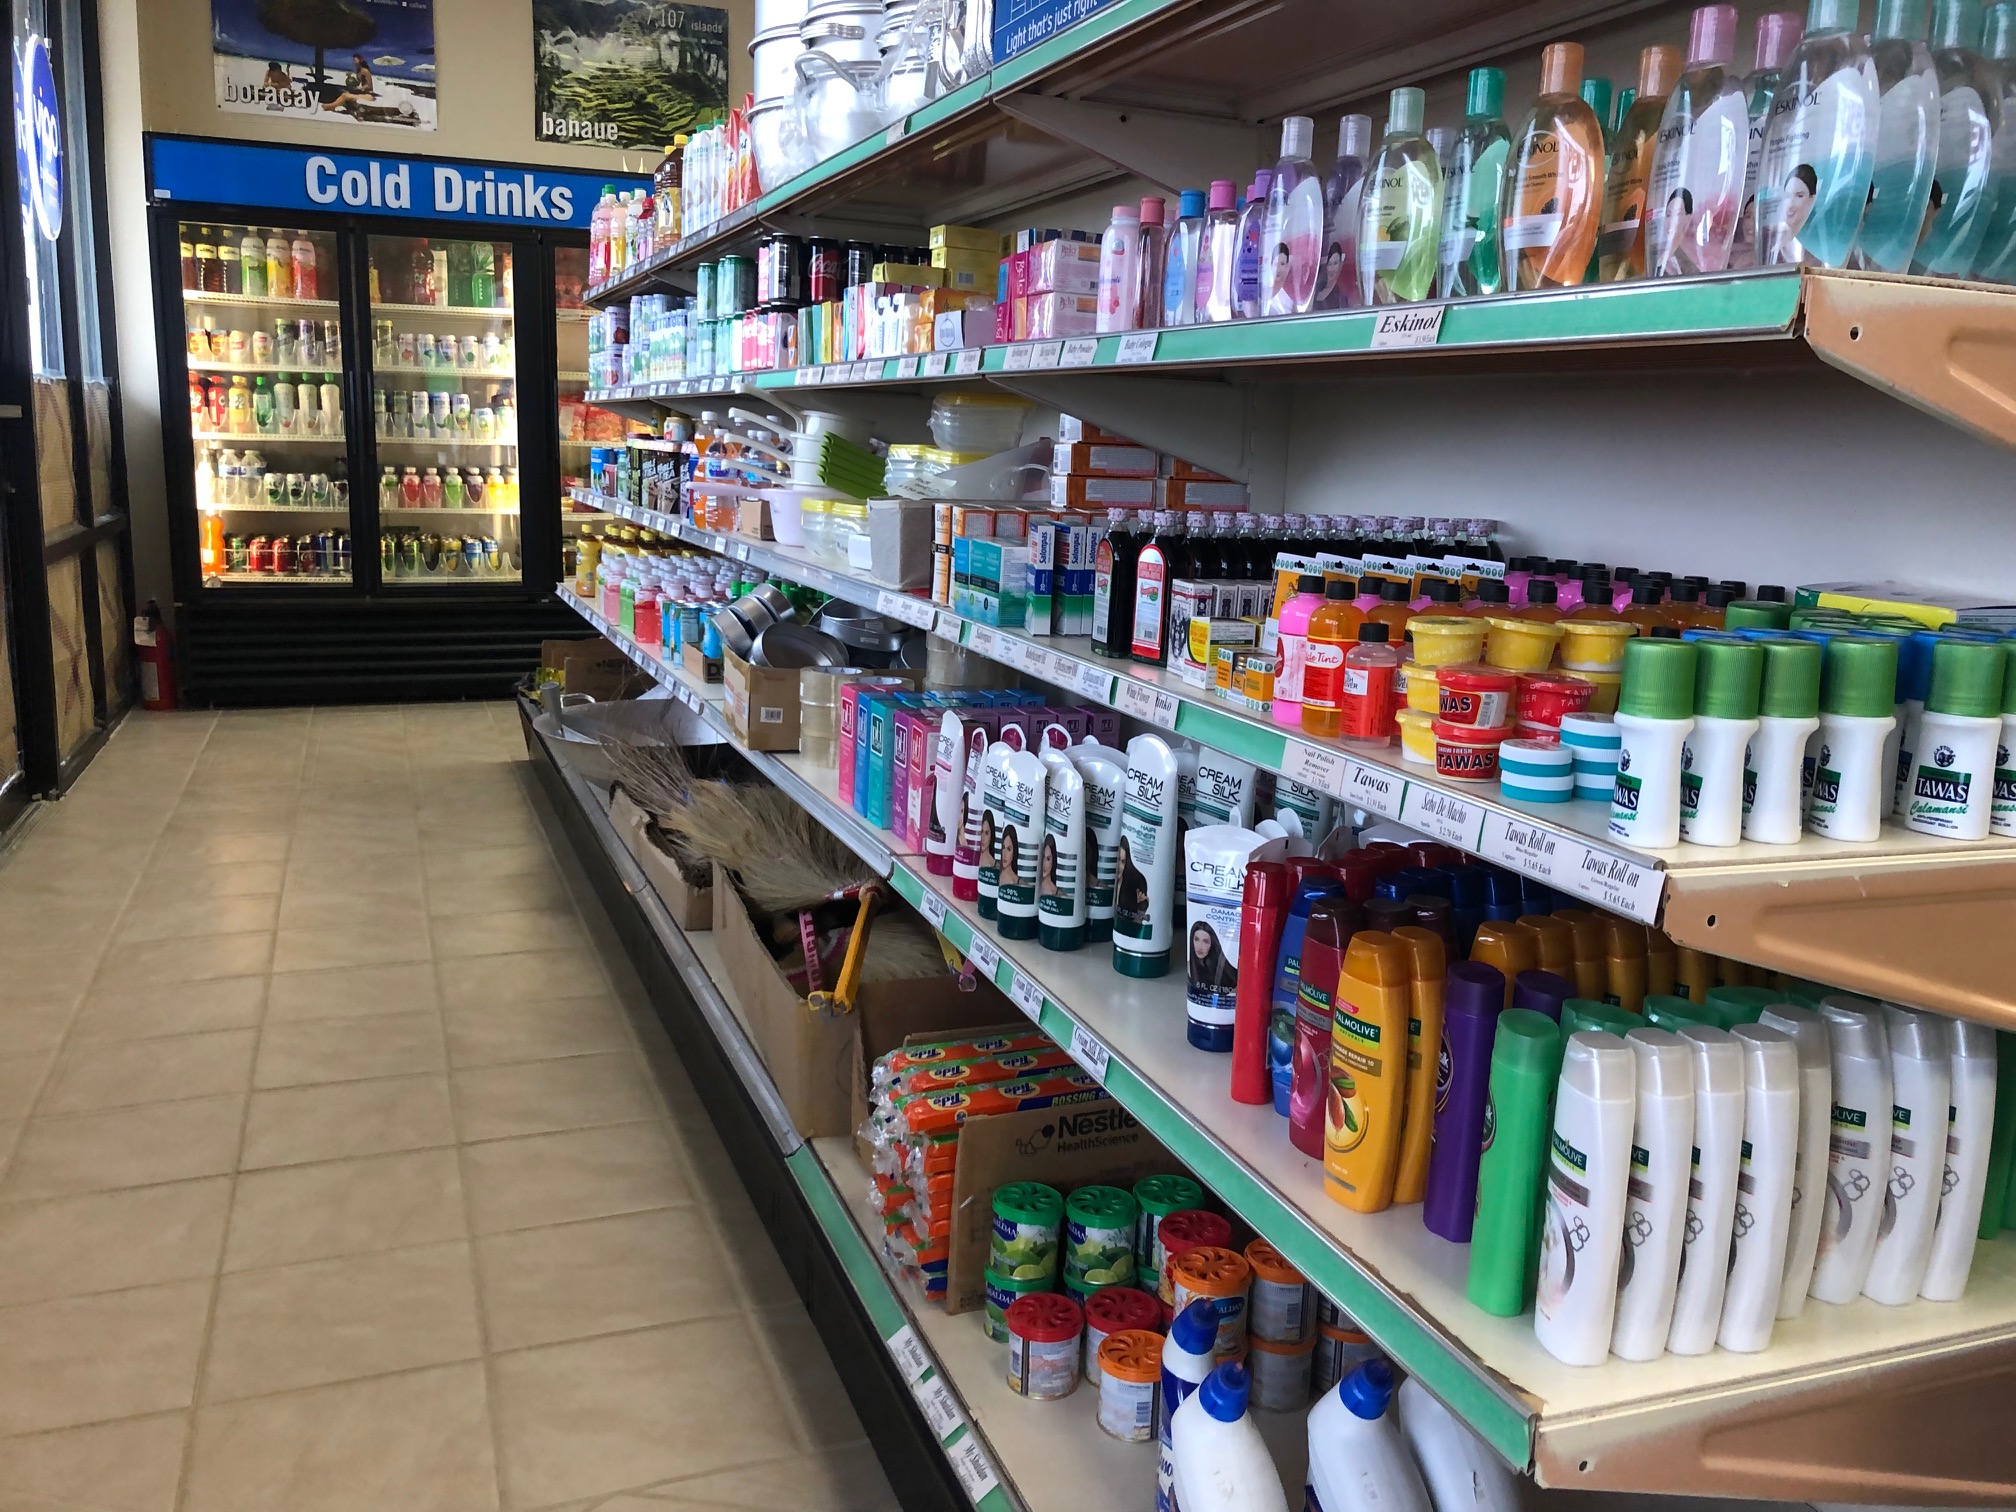 Inside the sun-soaked store, there is a front aisle of personal hygiene and cleaning items plus bottles of drinks. At the end of the aisle, there is a cooler with drinks and a blue sign that reads 